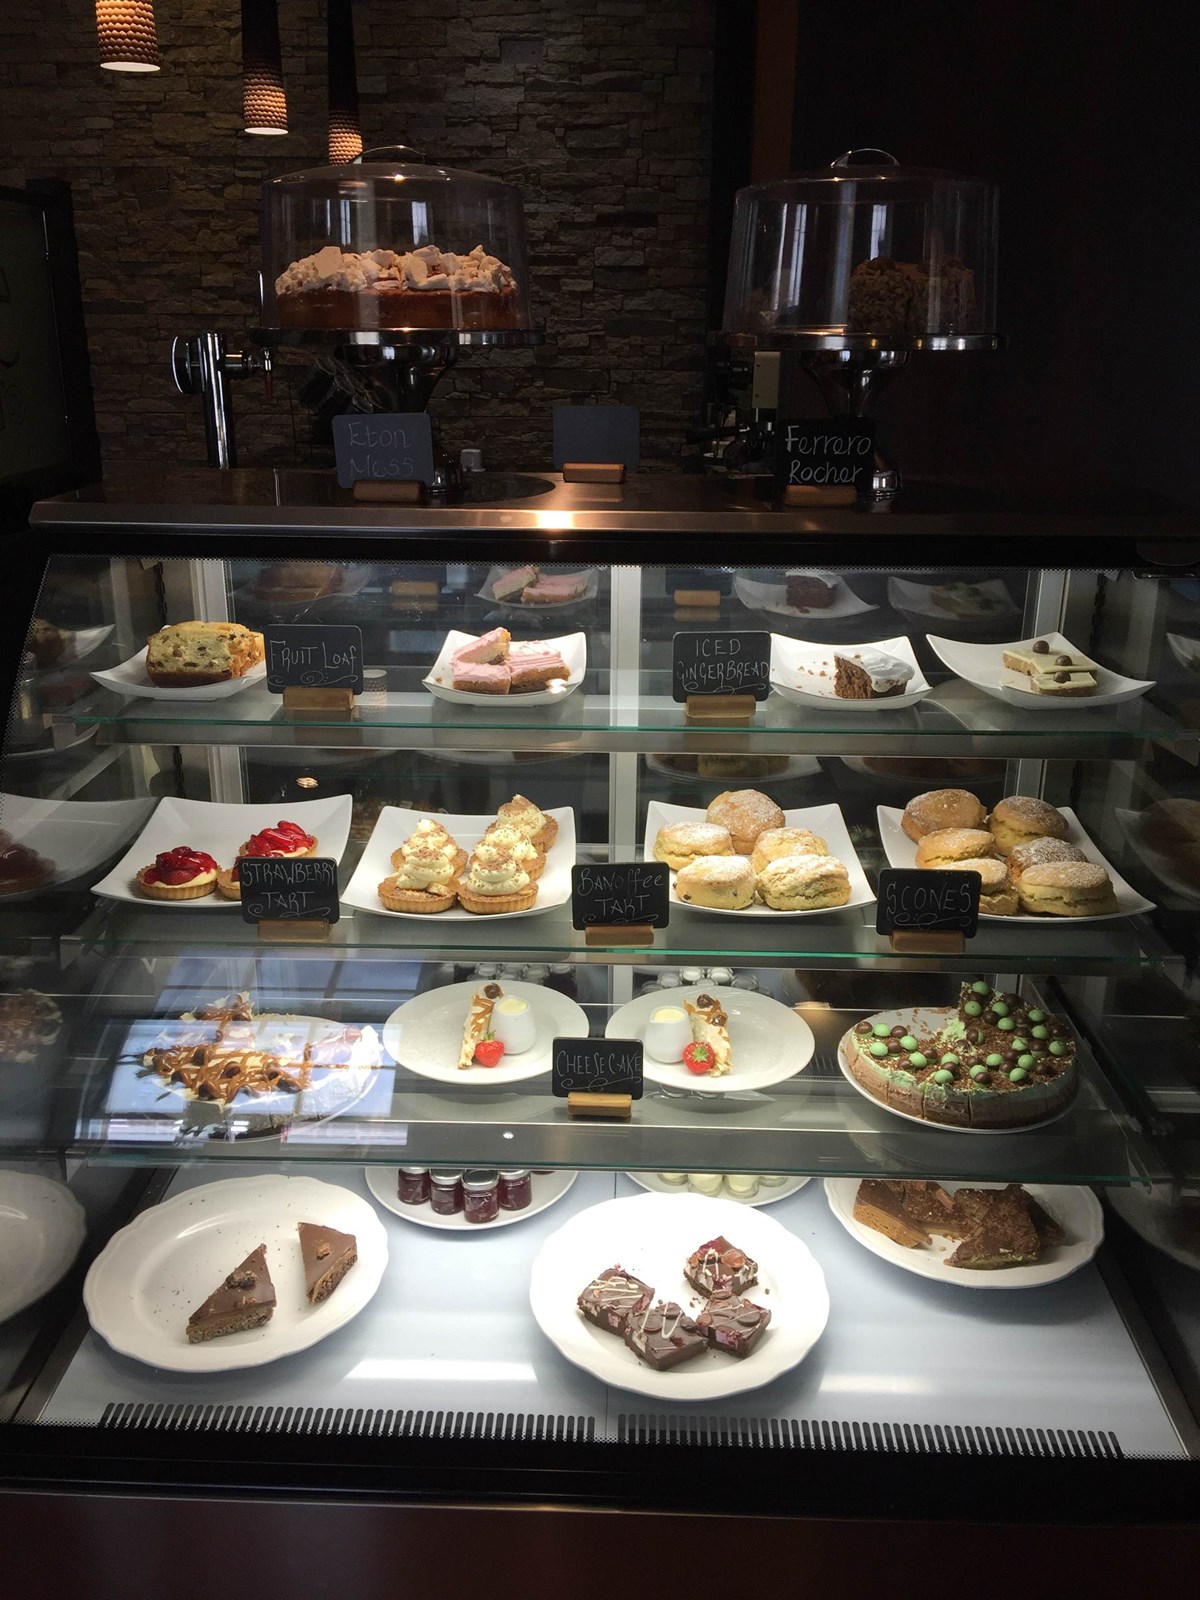 The cakes and pastrys available at the Dumfries Arms Hotel.